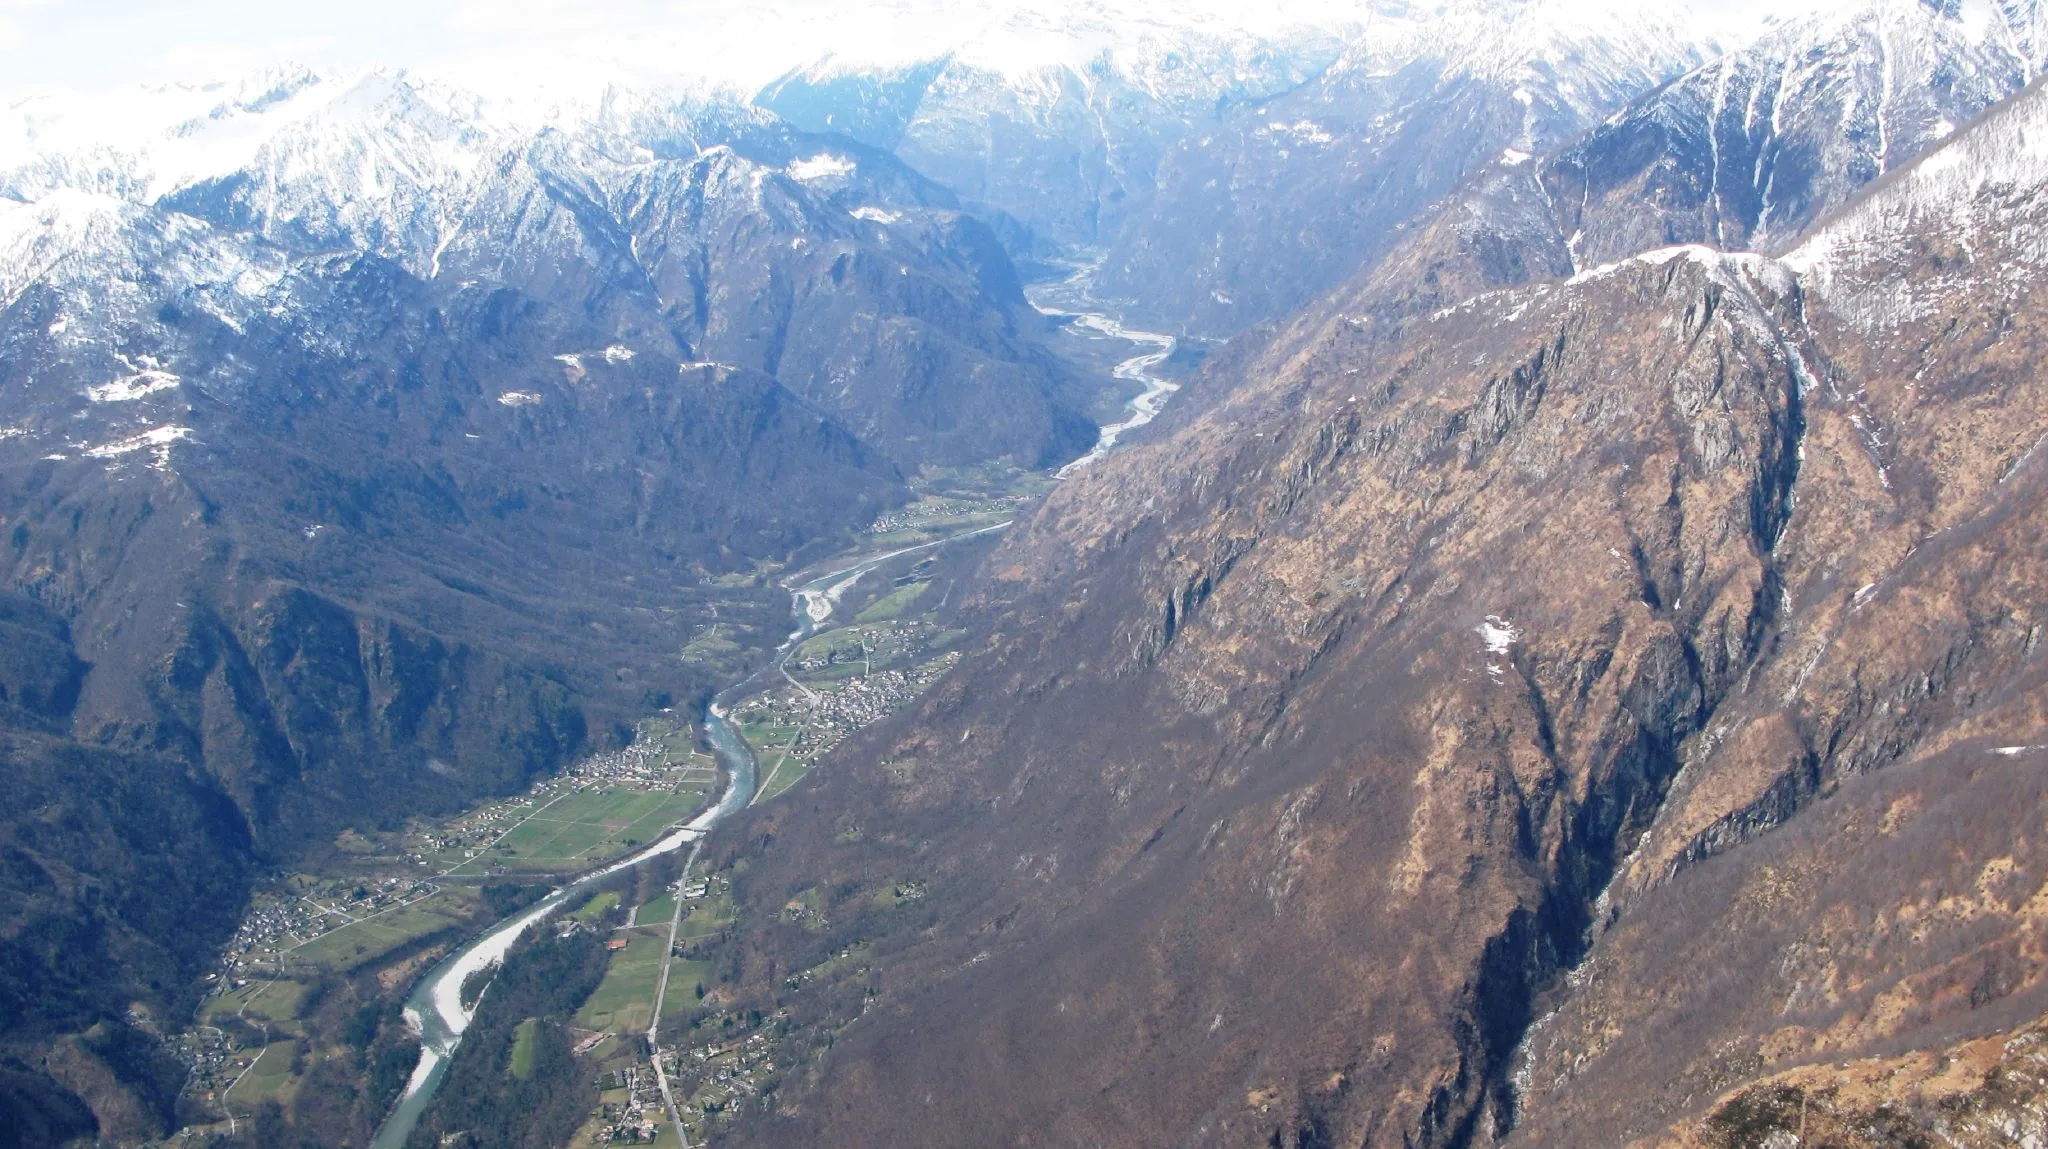 Photo showing: Valle Maggia in Ticino, Switzerland. Gordevio is in the foreground on the right side of the Maggia river, with Maggia in the center, also on the right side.